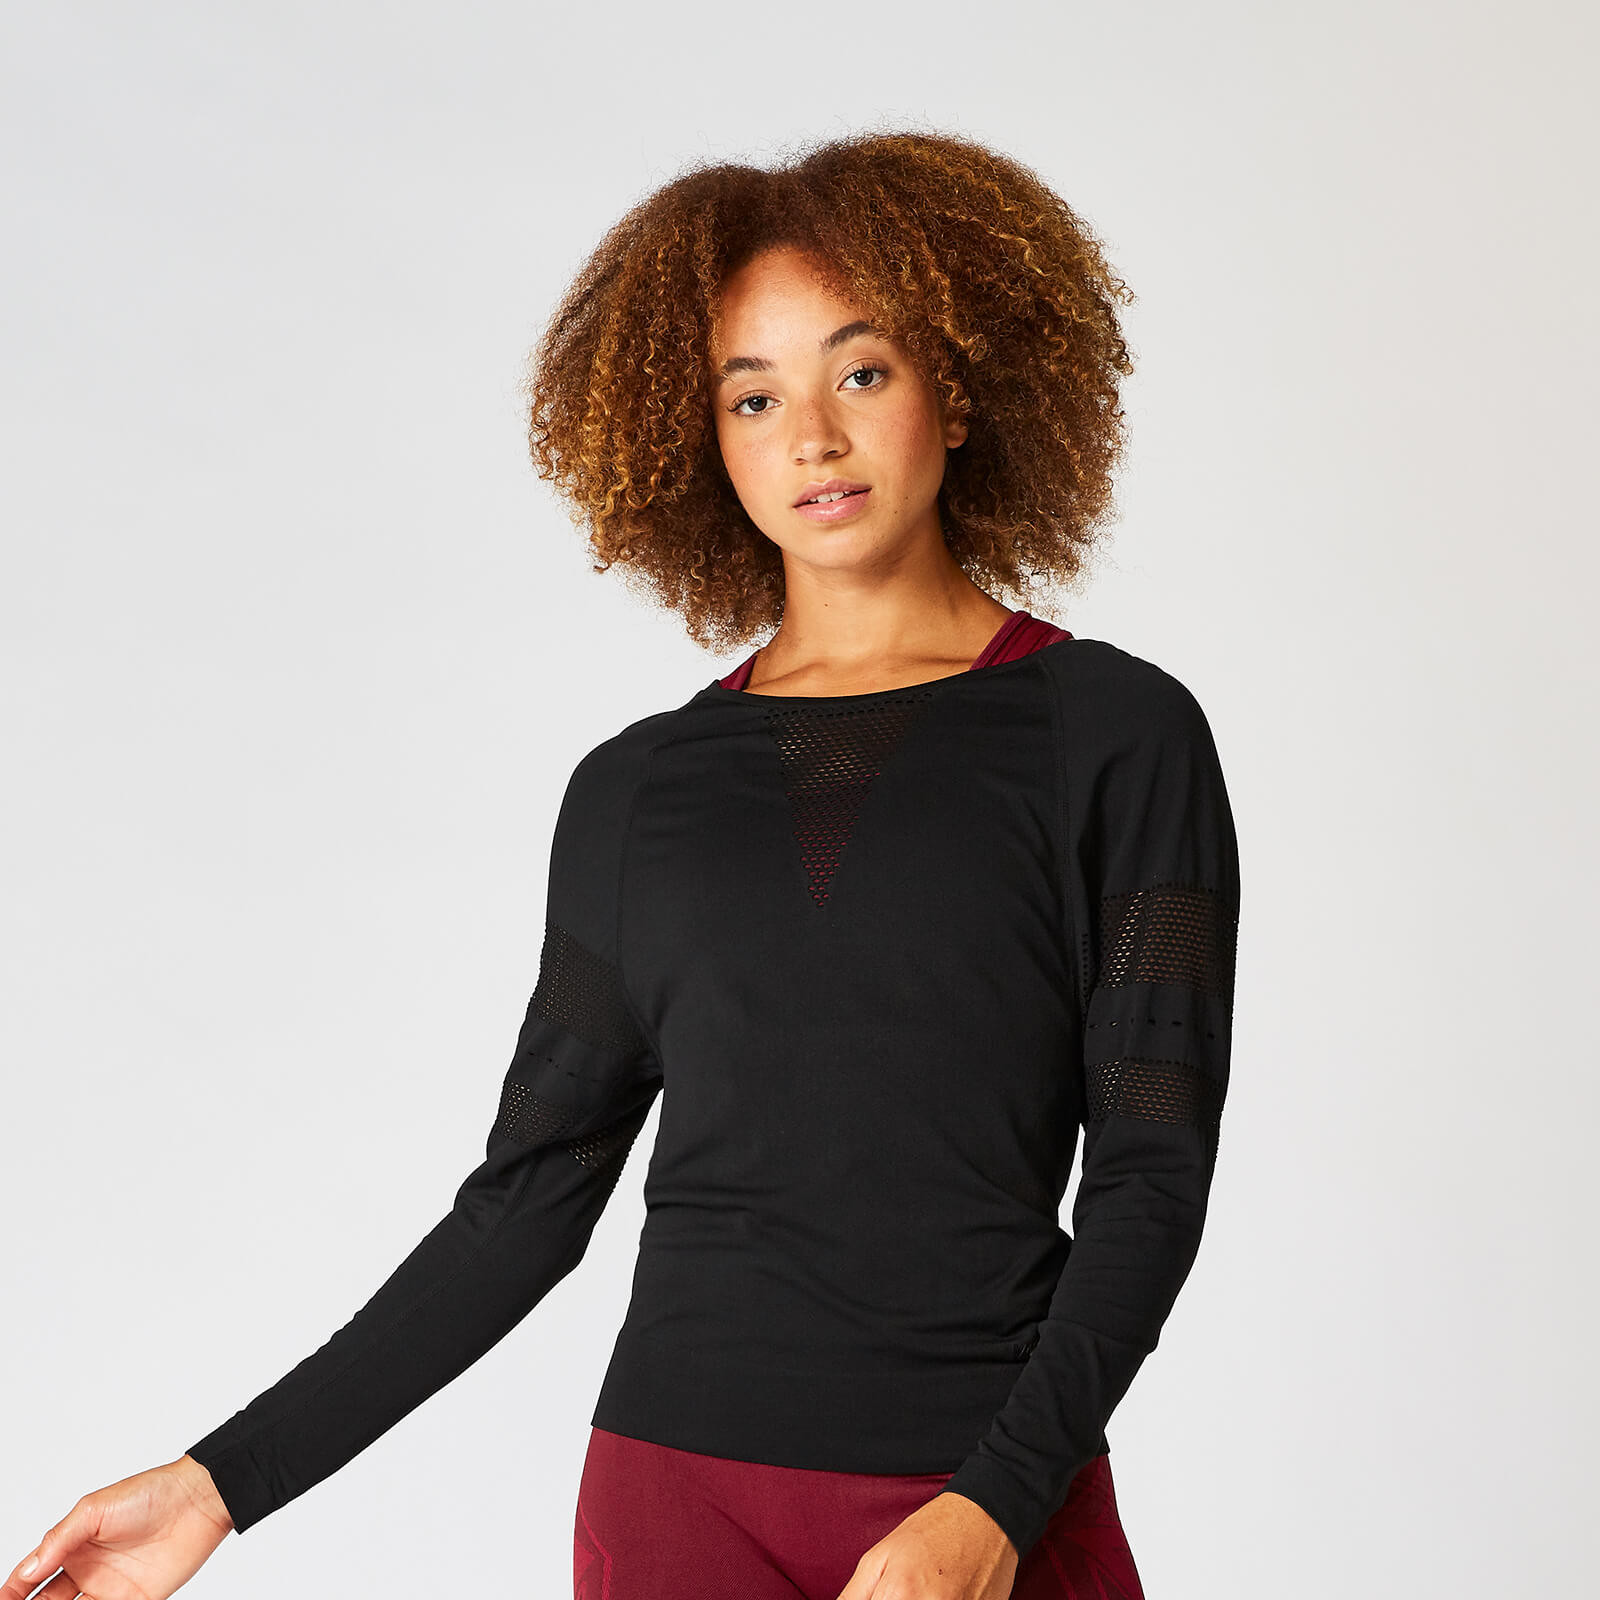 Shape Seamless Loose-Fit Top - Black - XS